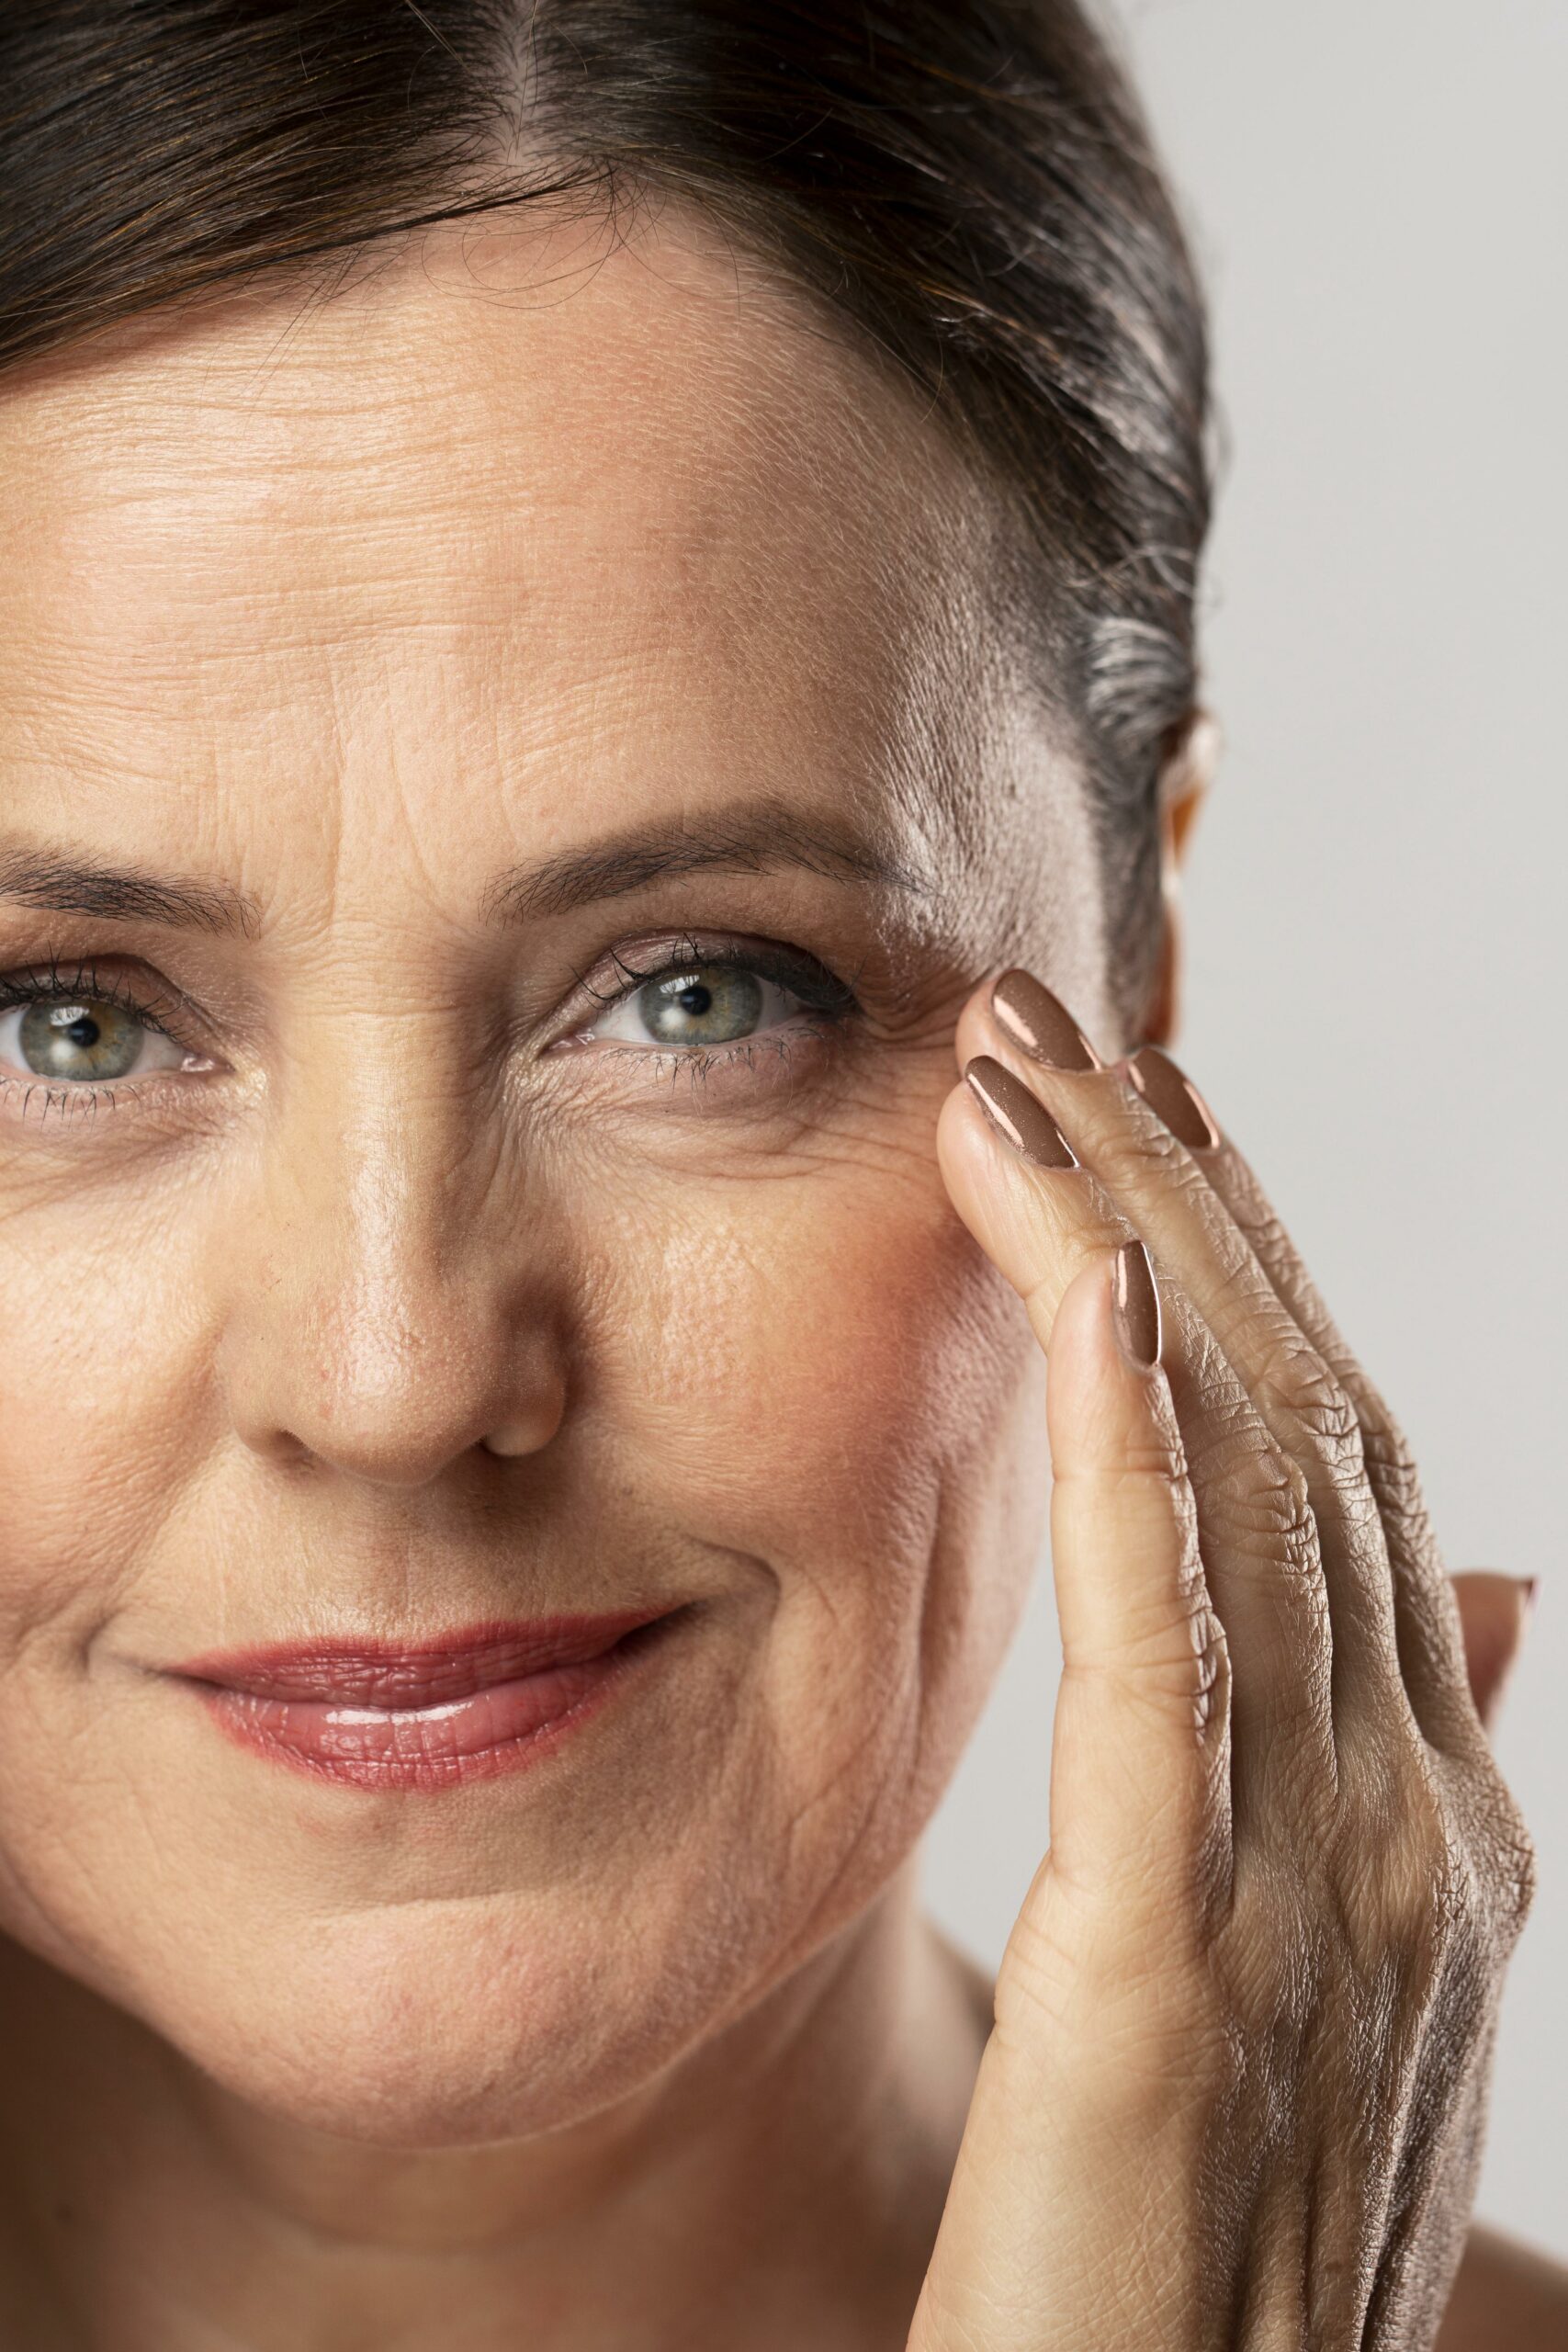 Anti-aging treatments - Best face treatment for wrinkles